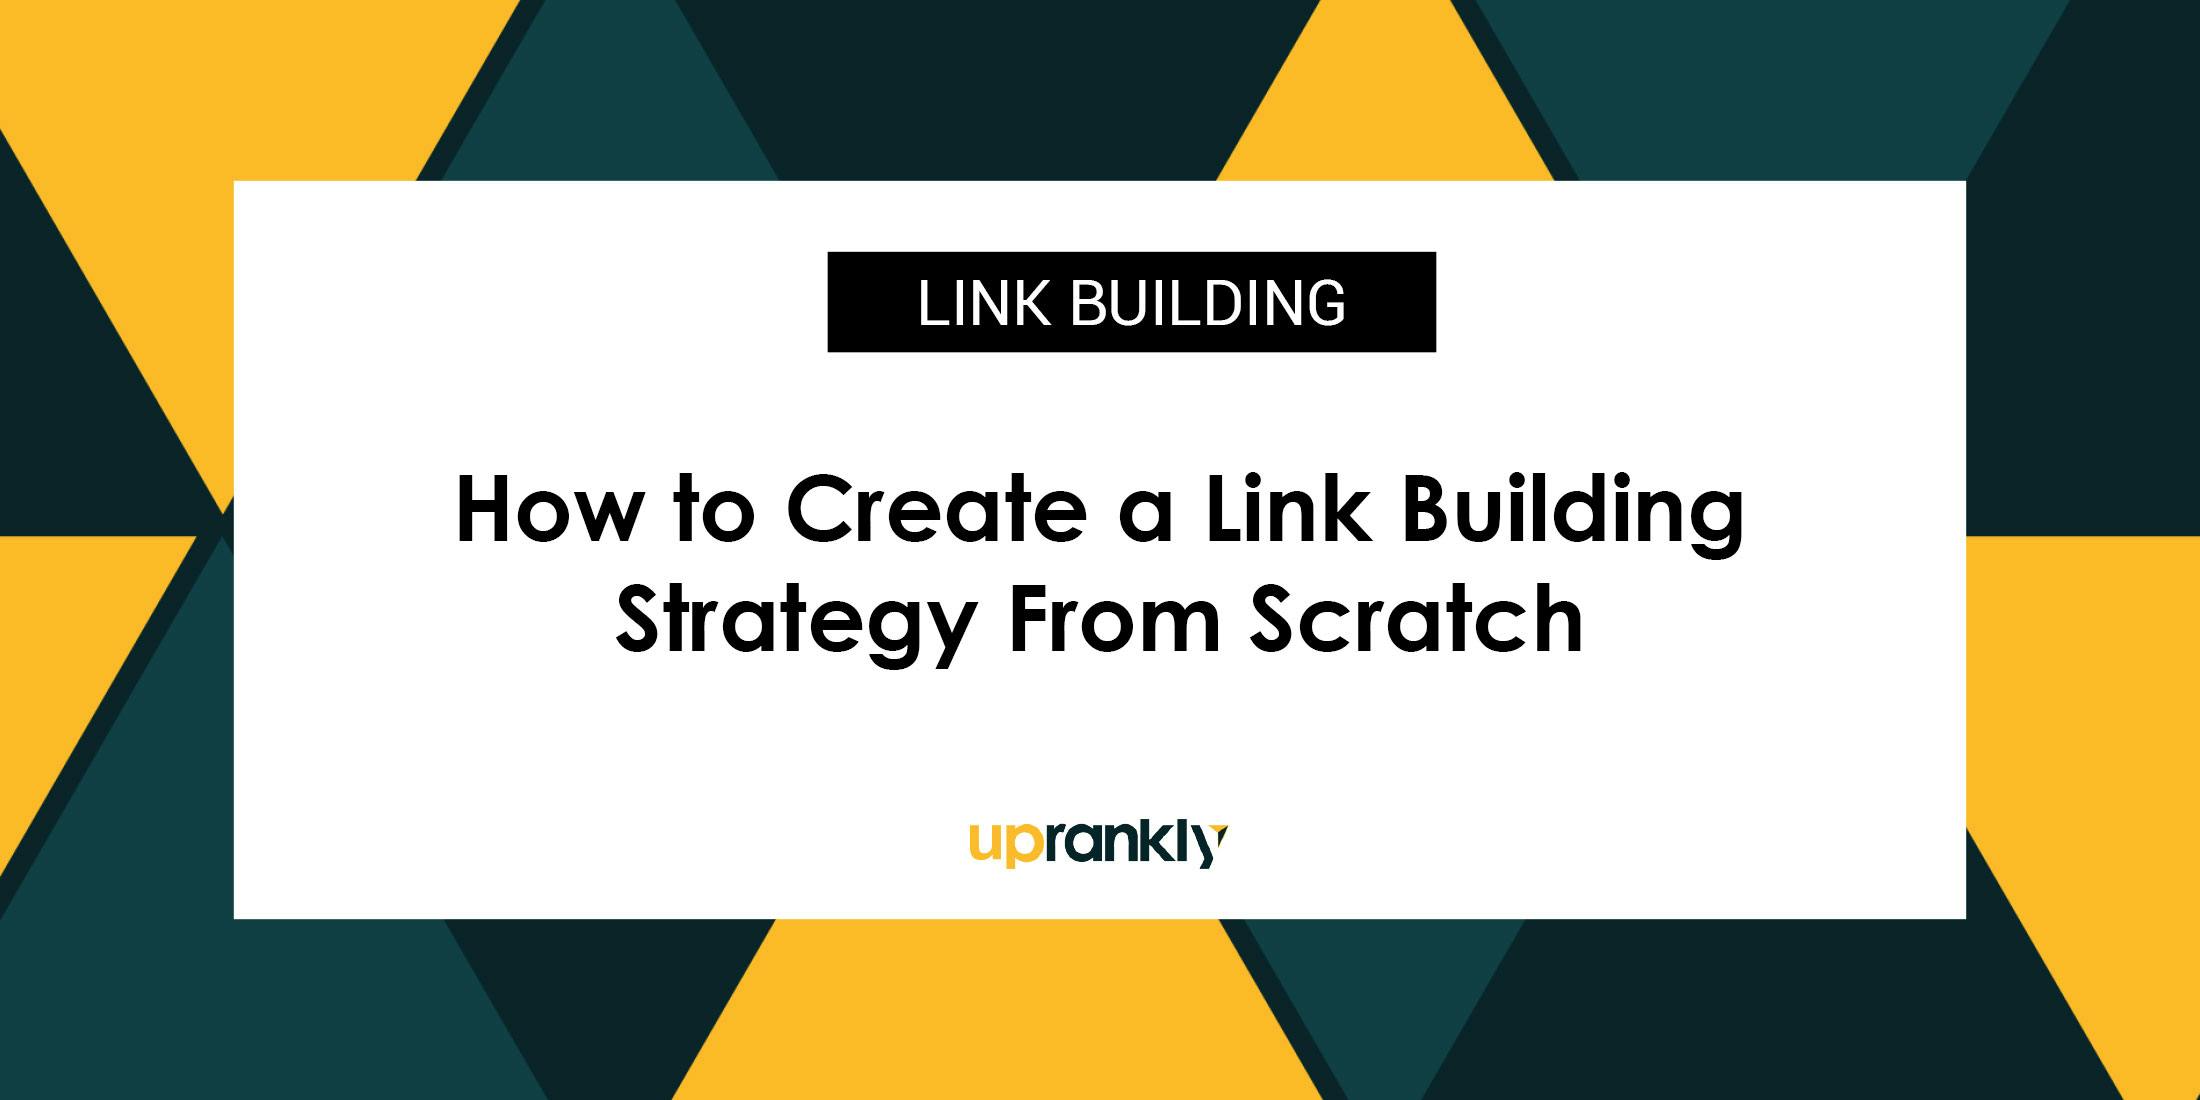 How to Create a Link Building Strategy From Scratch